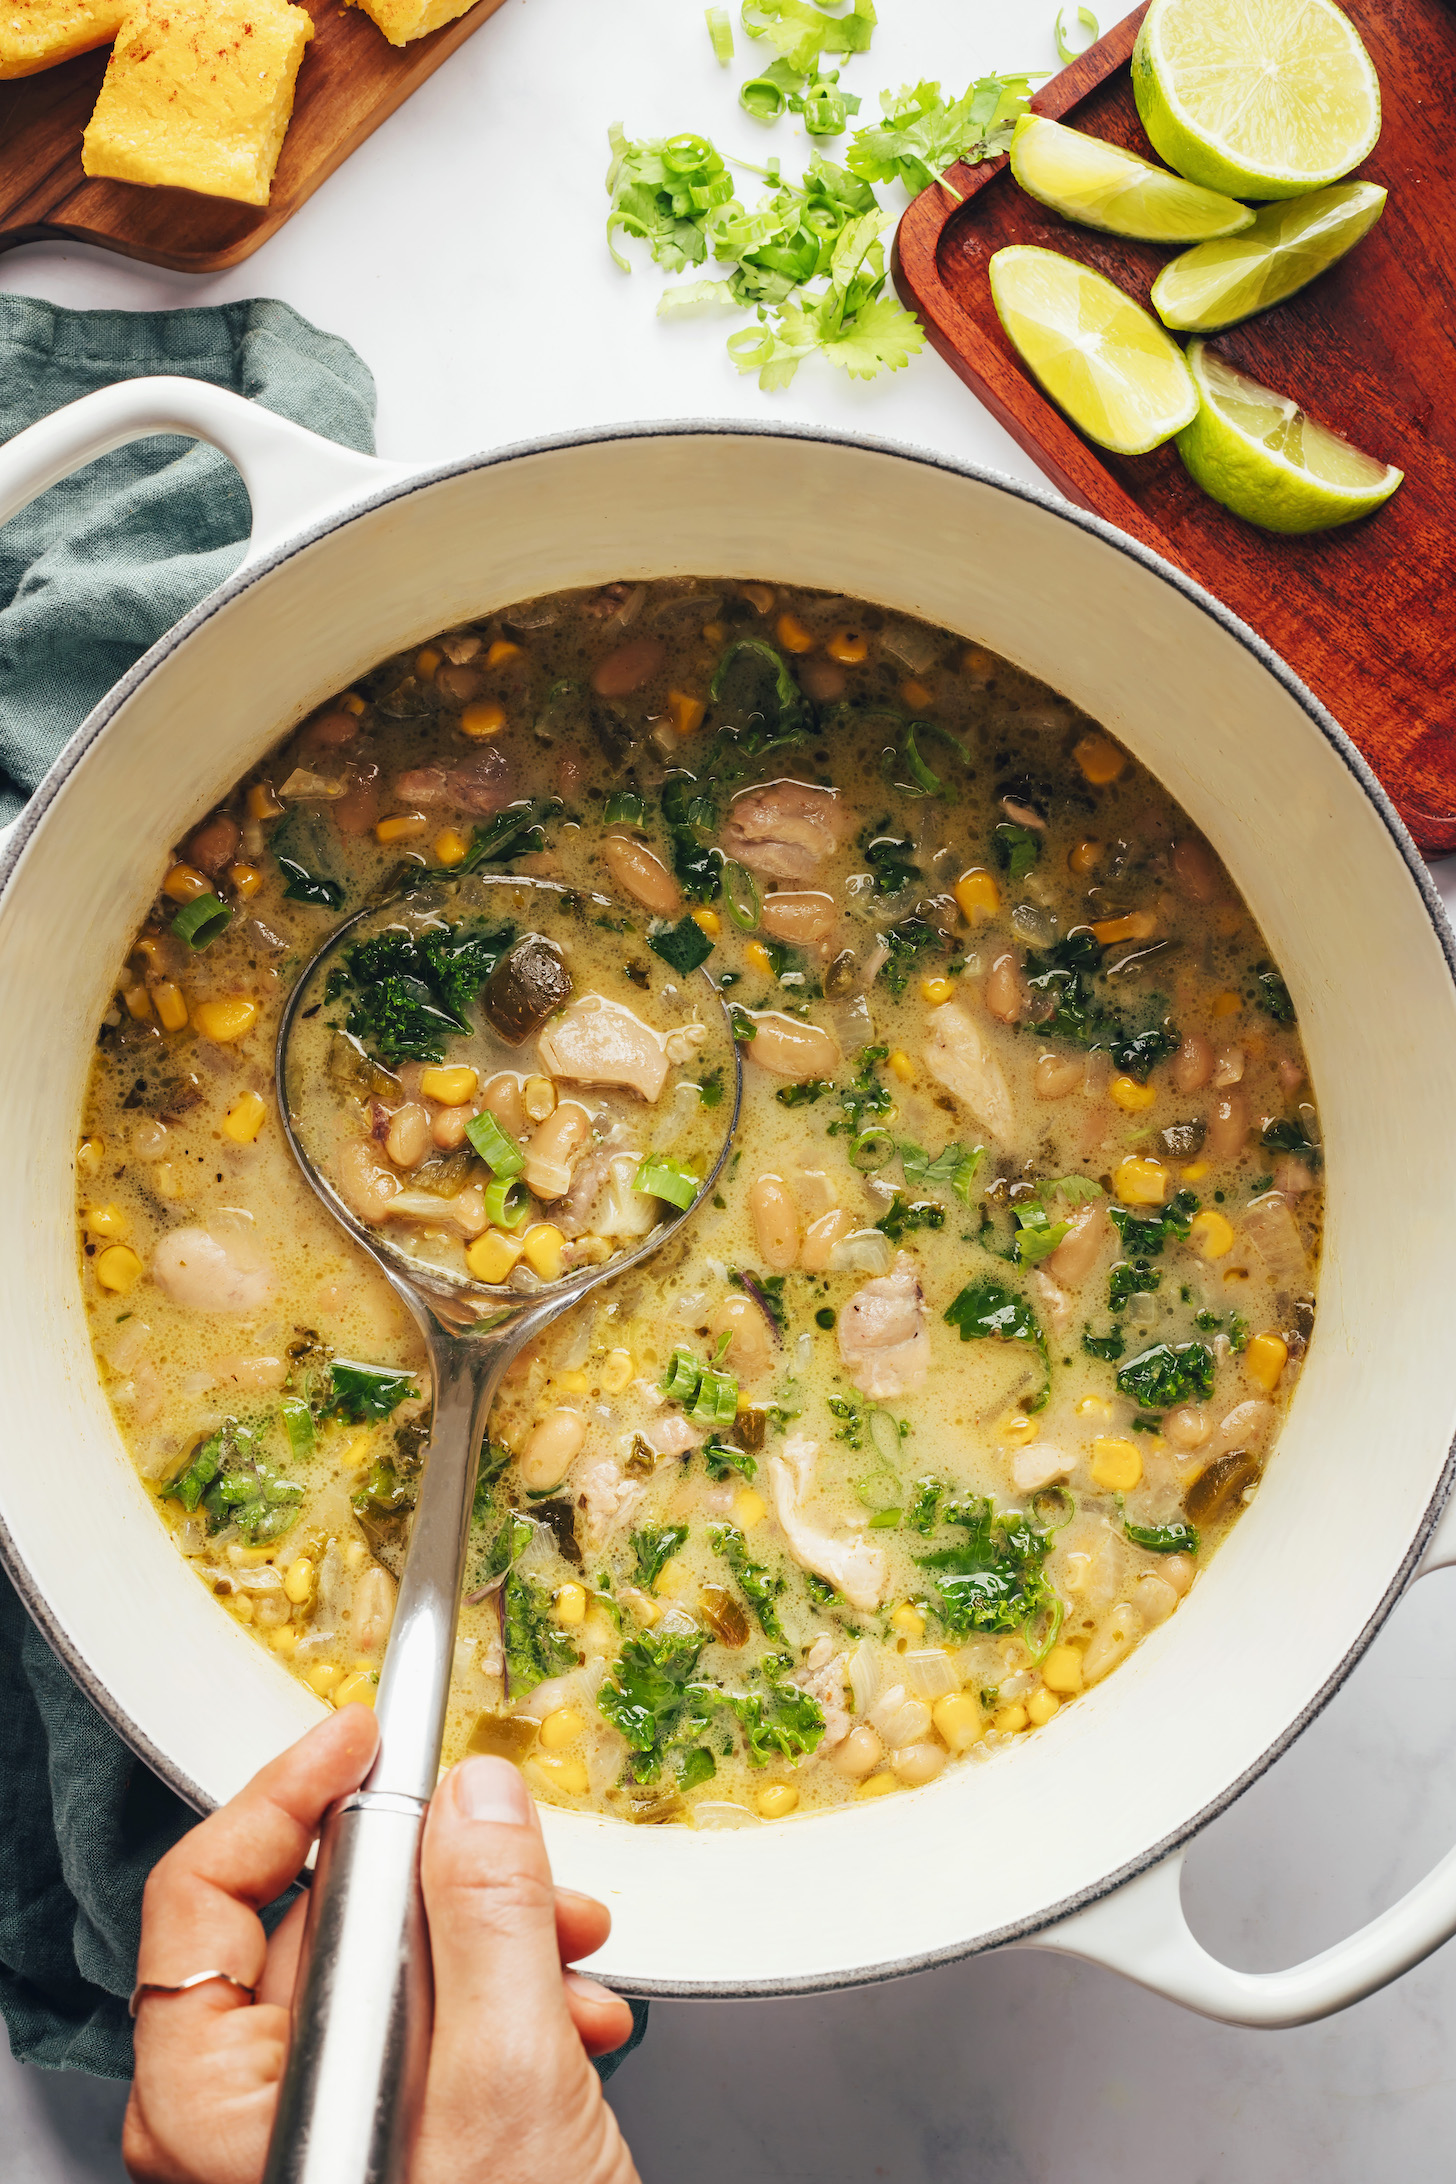 Ladle in a pot of our easy white bean chicken chili recipe